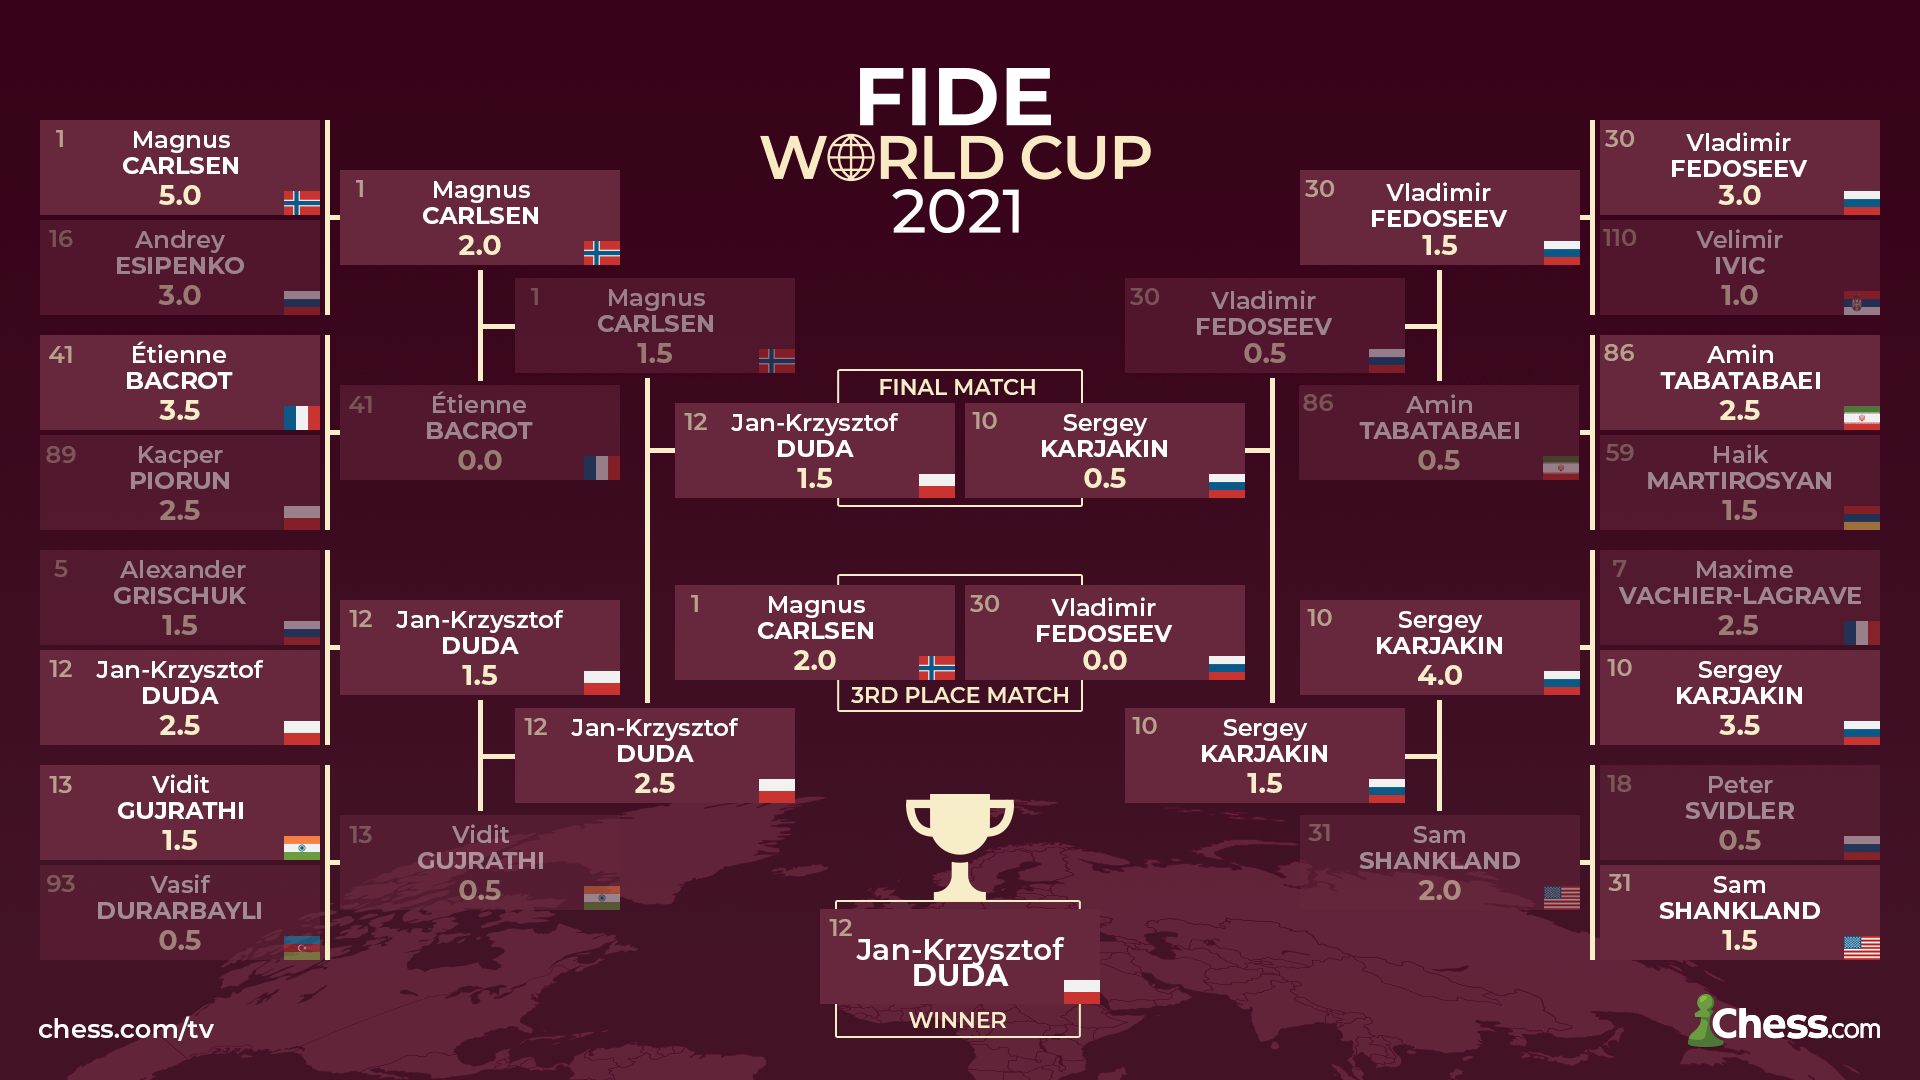 FIDE World Cup 2021 Final Results